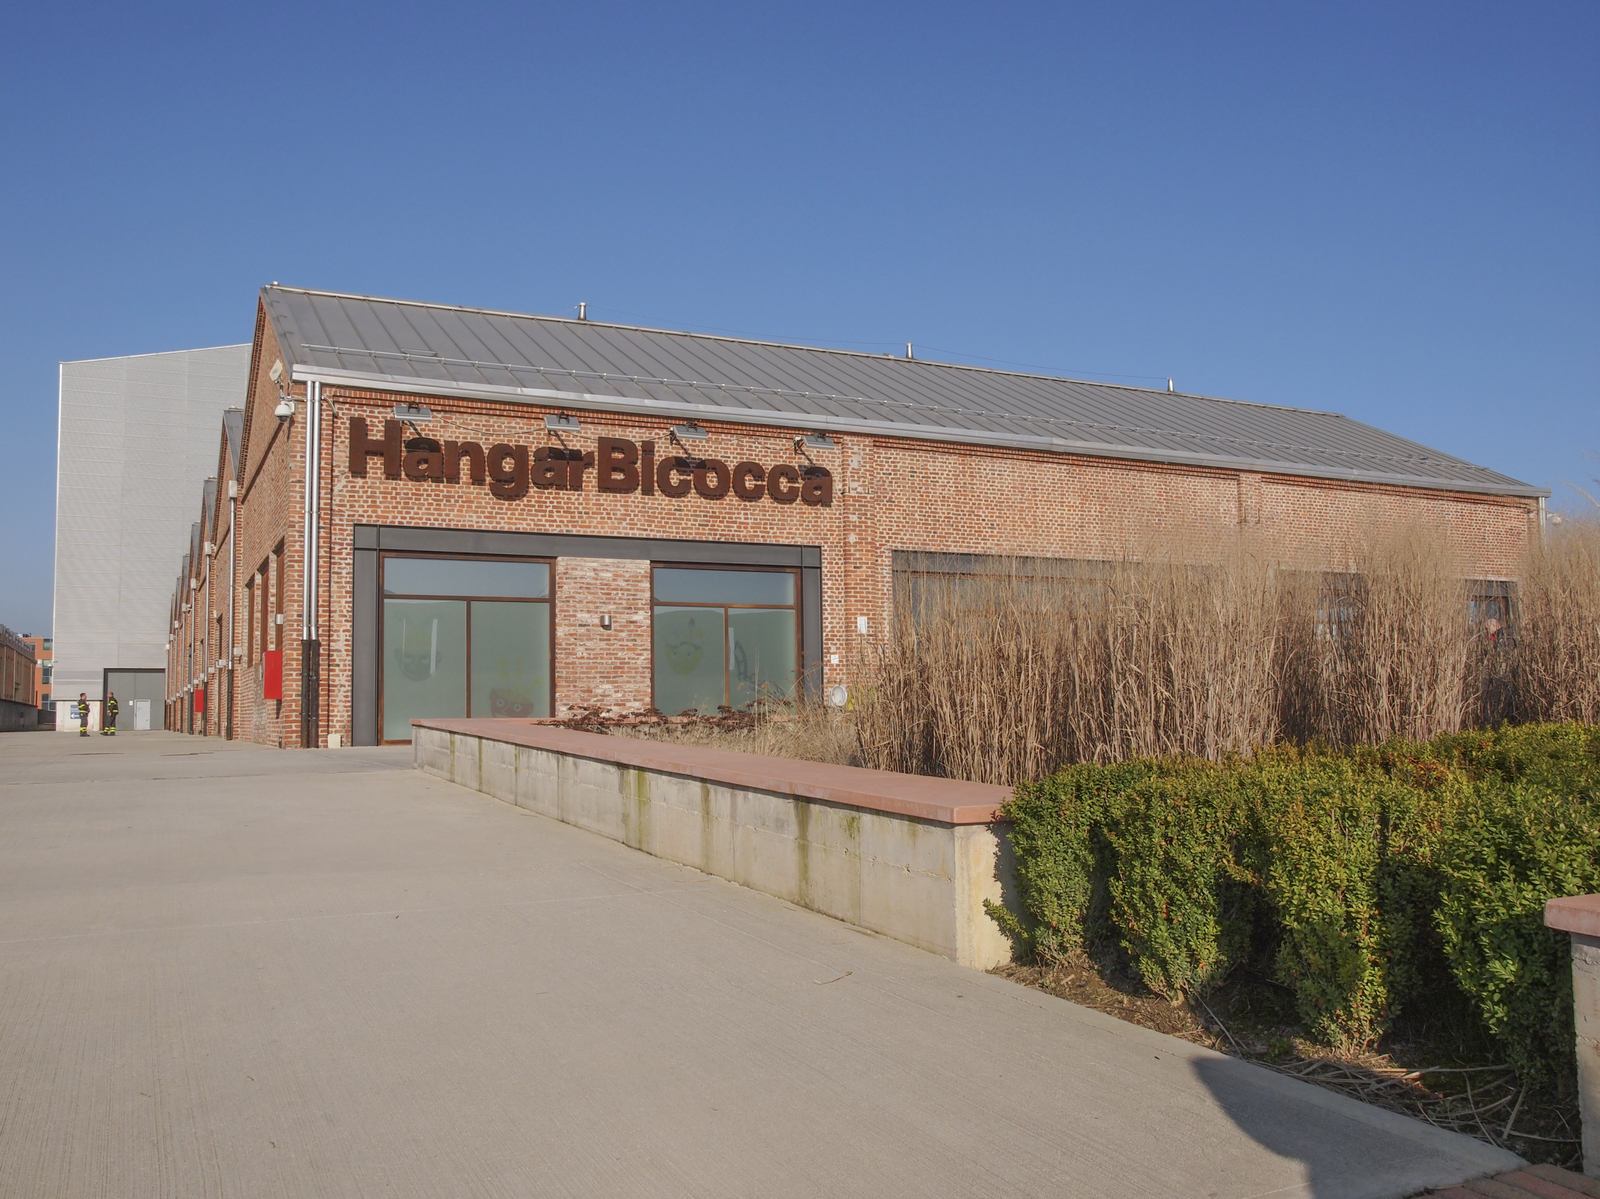 Milan, Italy - February 23, 2014: The Hangar Bicocca is a new exhibition room for contemporary art built in 2004 into an abandoned factory in a large regeneration area